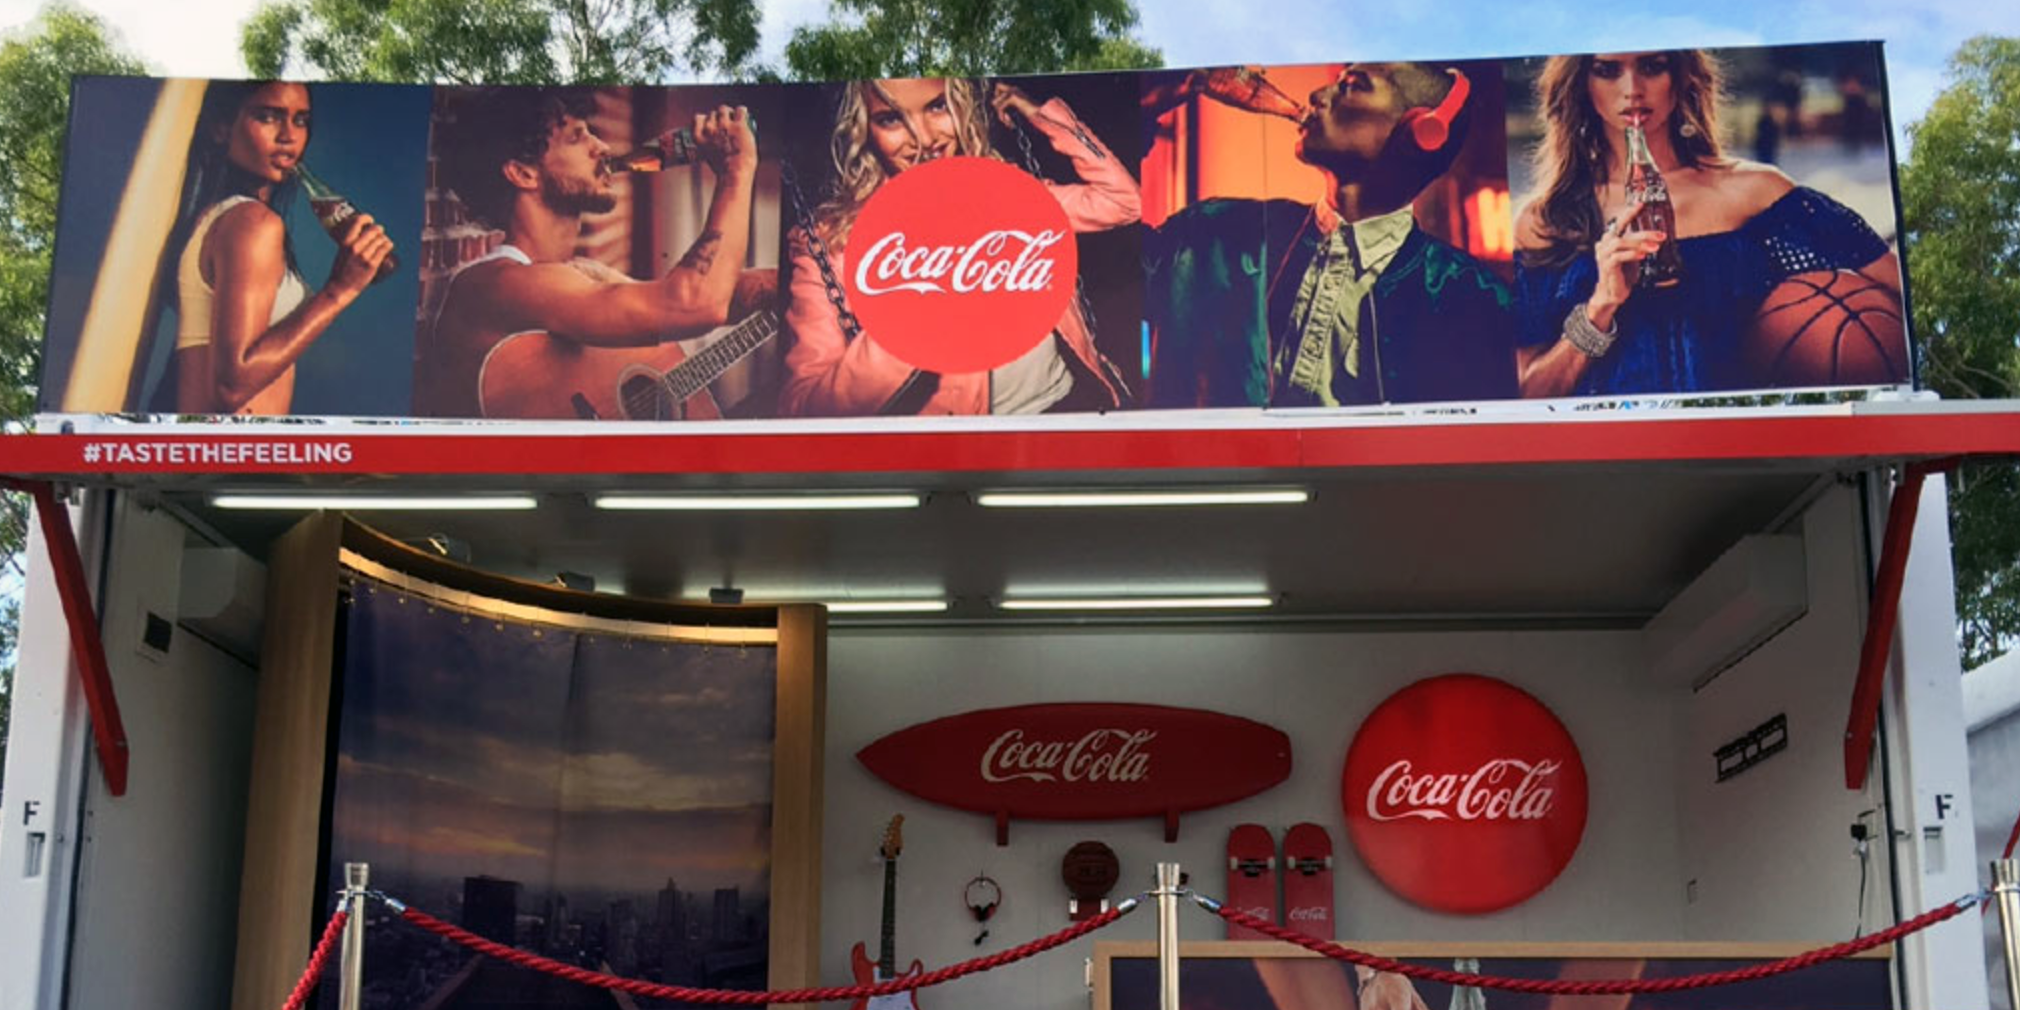 Shipping container signs - Coca-Cola